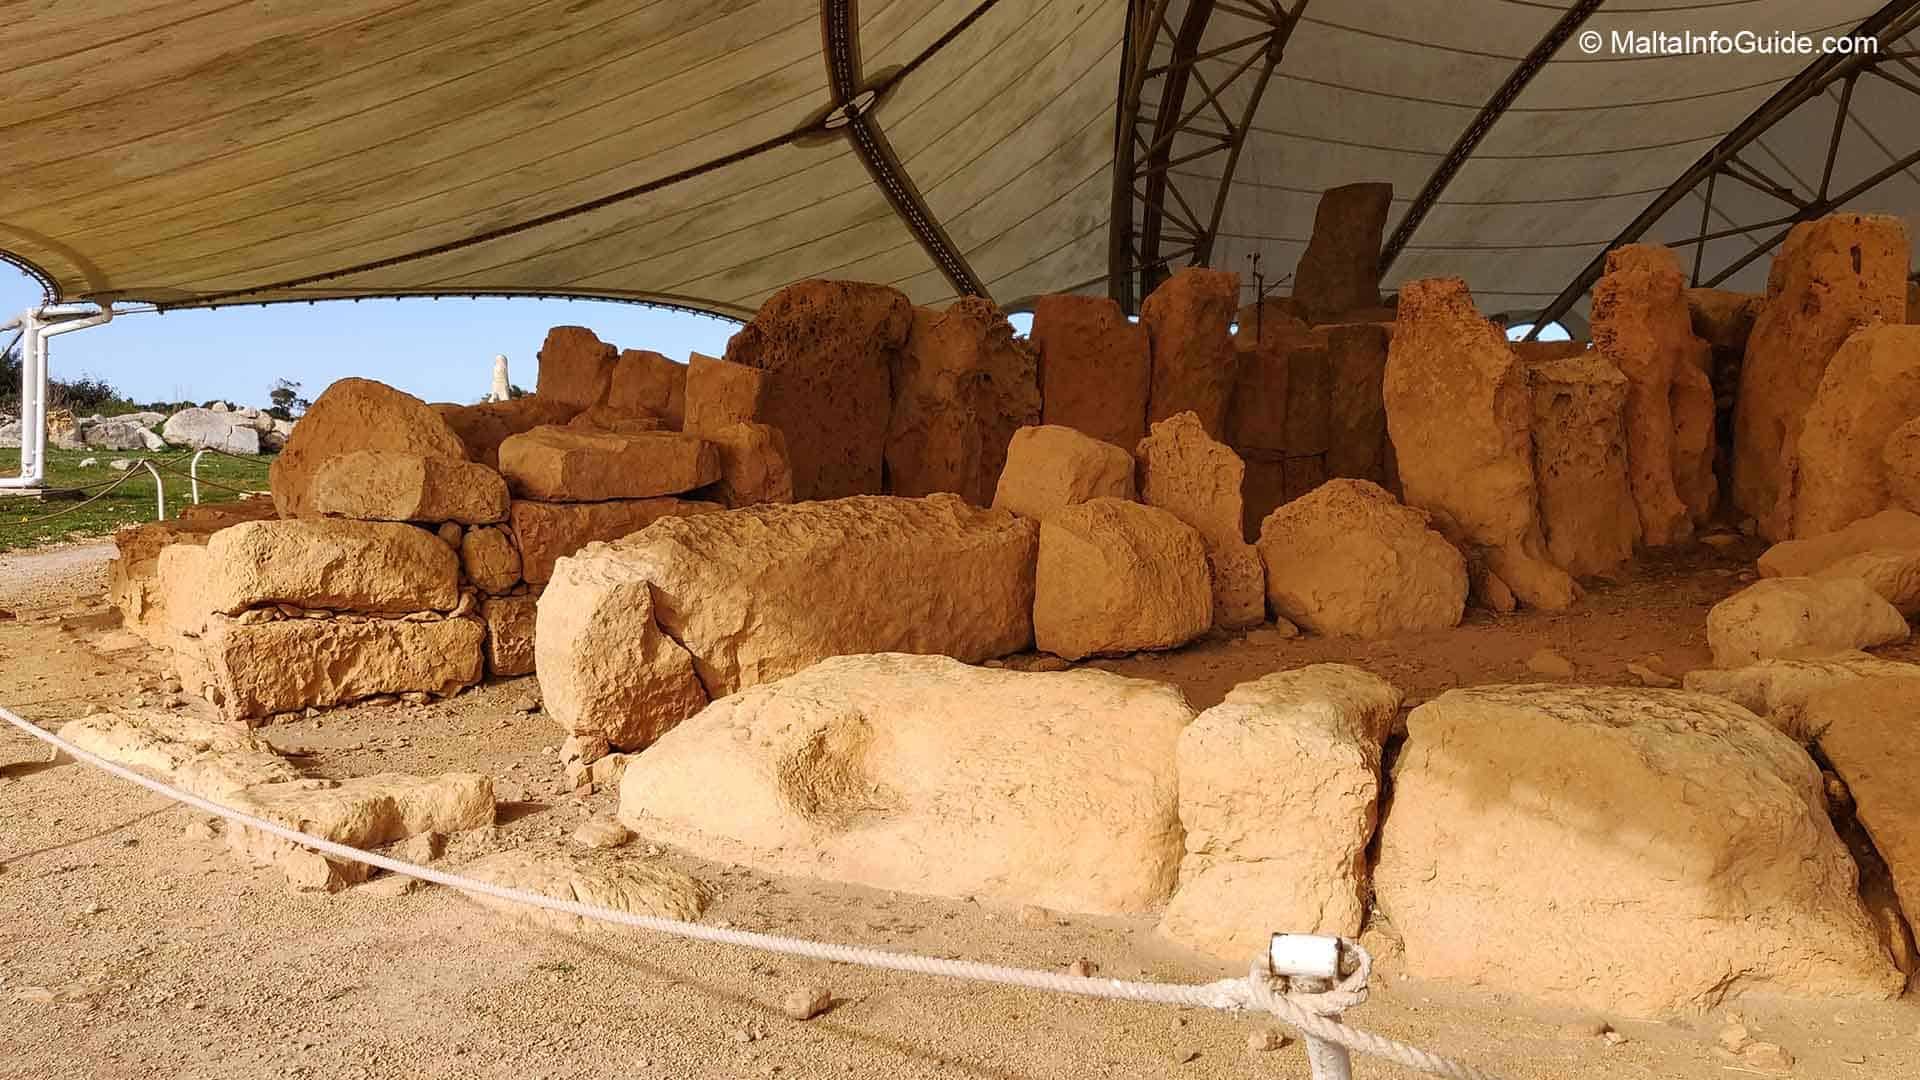 The Hagar Qim structure covered in a tent.